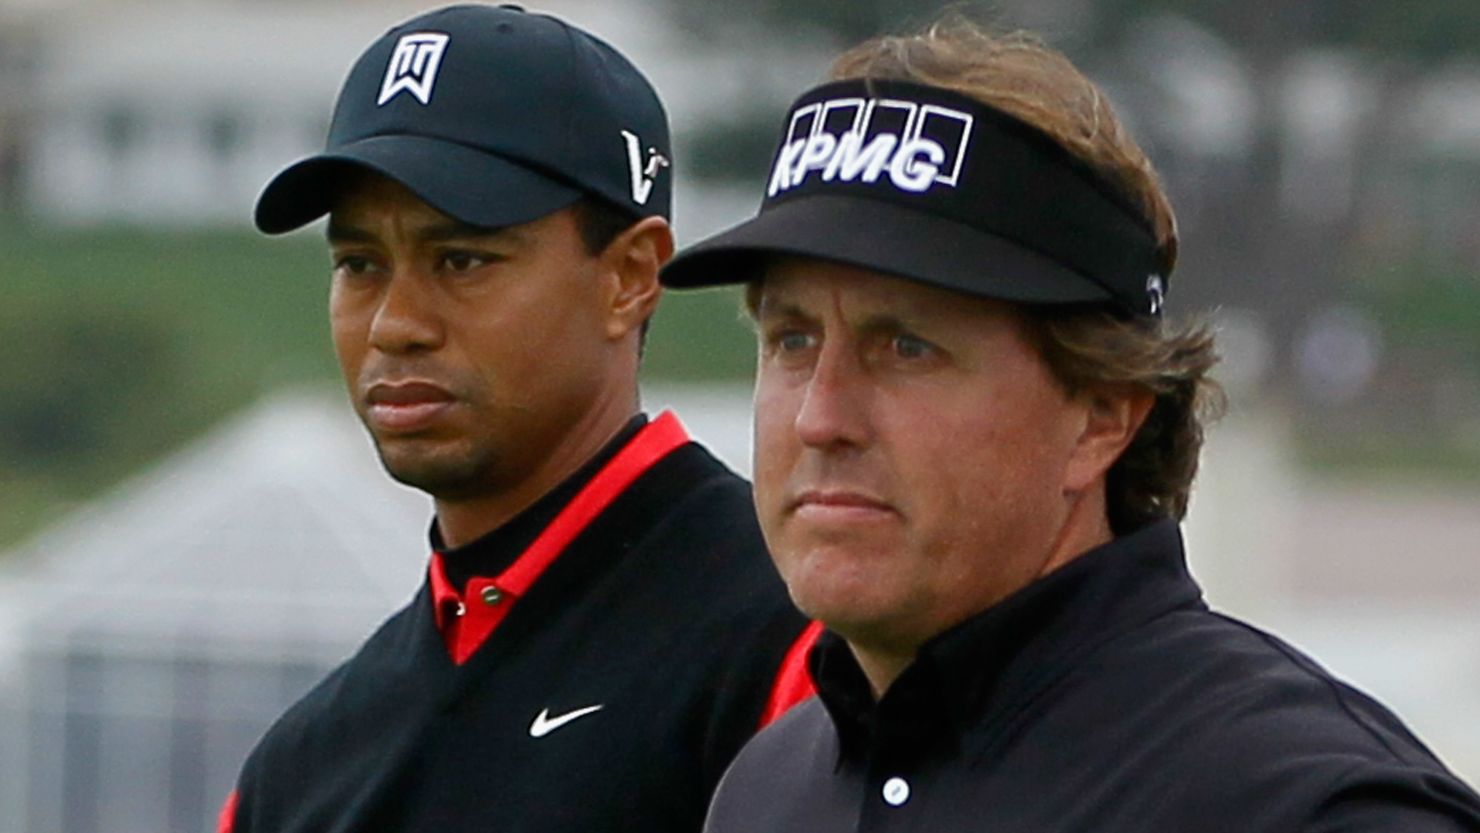 Tiger Woods, left, will play at a major with Phil Mickelson for the first time since the Masters in 2009.